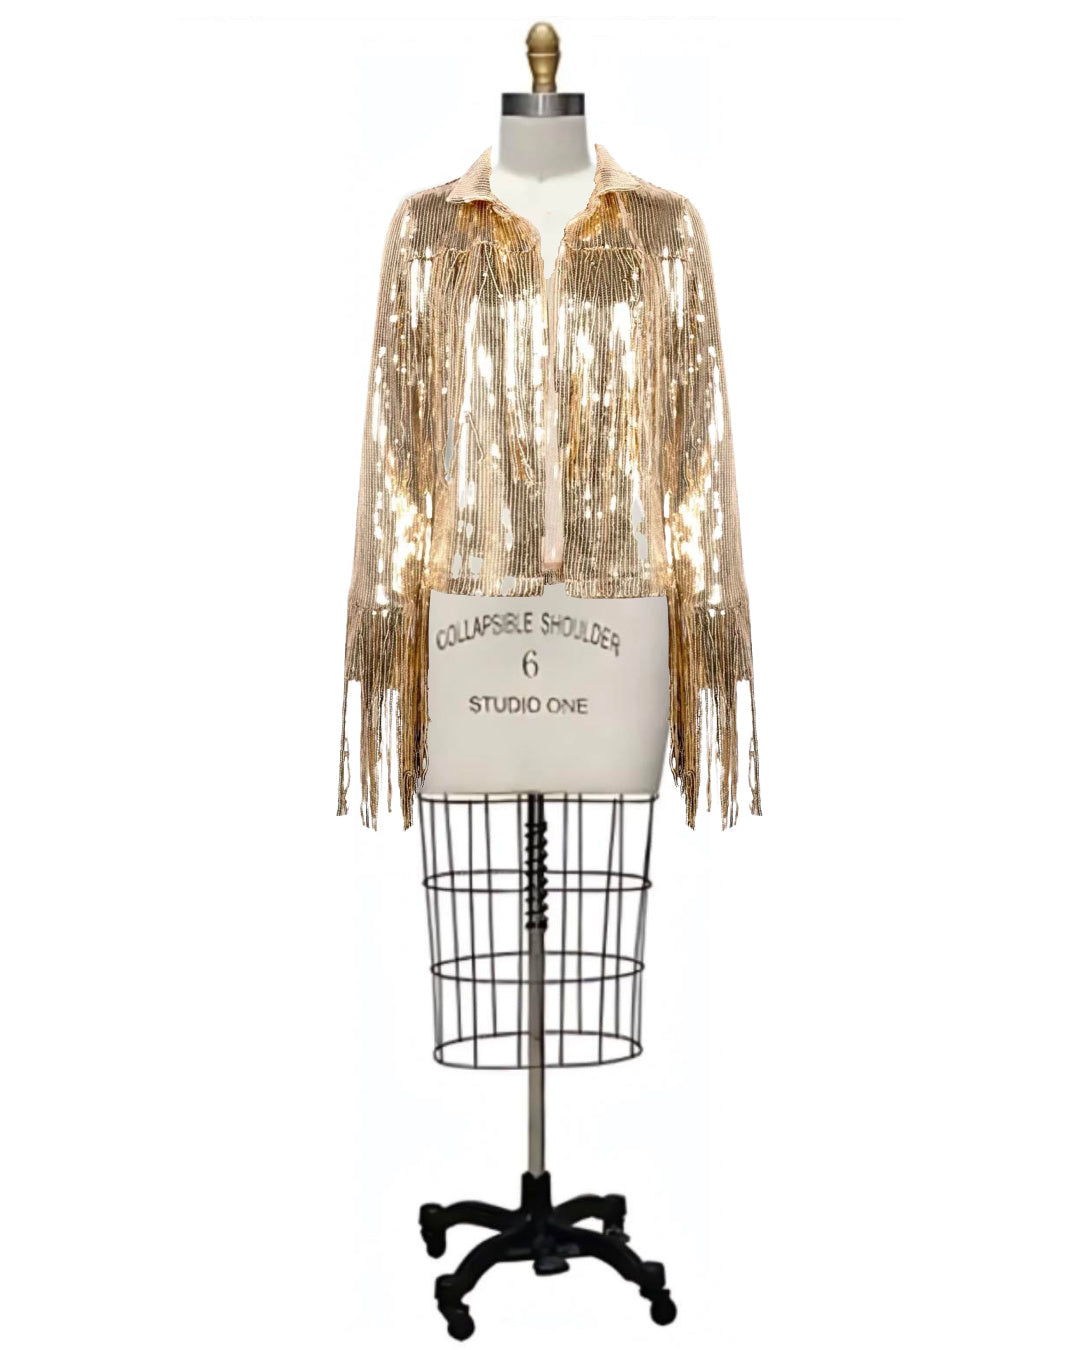 Shania- the Sequined Fringed Long Sleeved Jacket Gold or Silver Plus Sizes